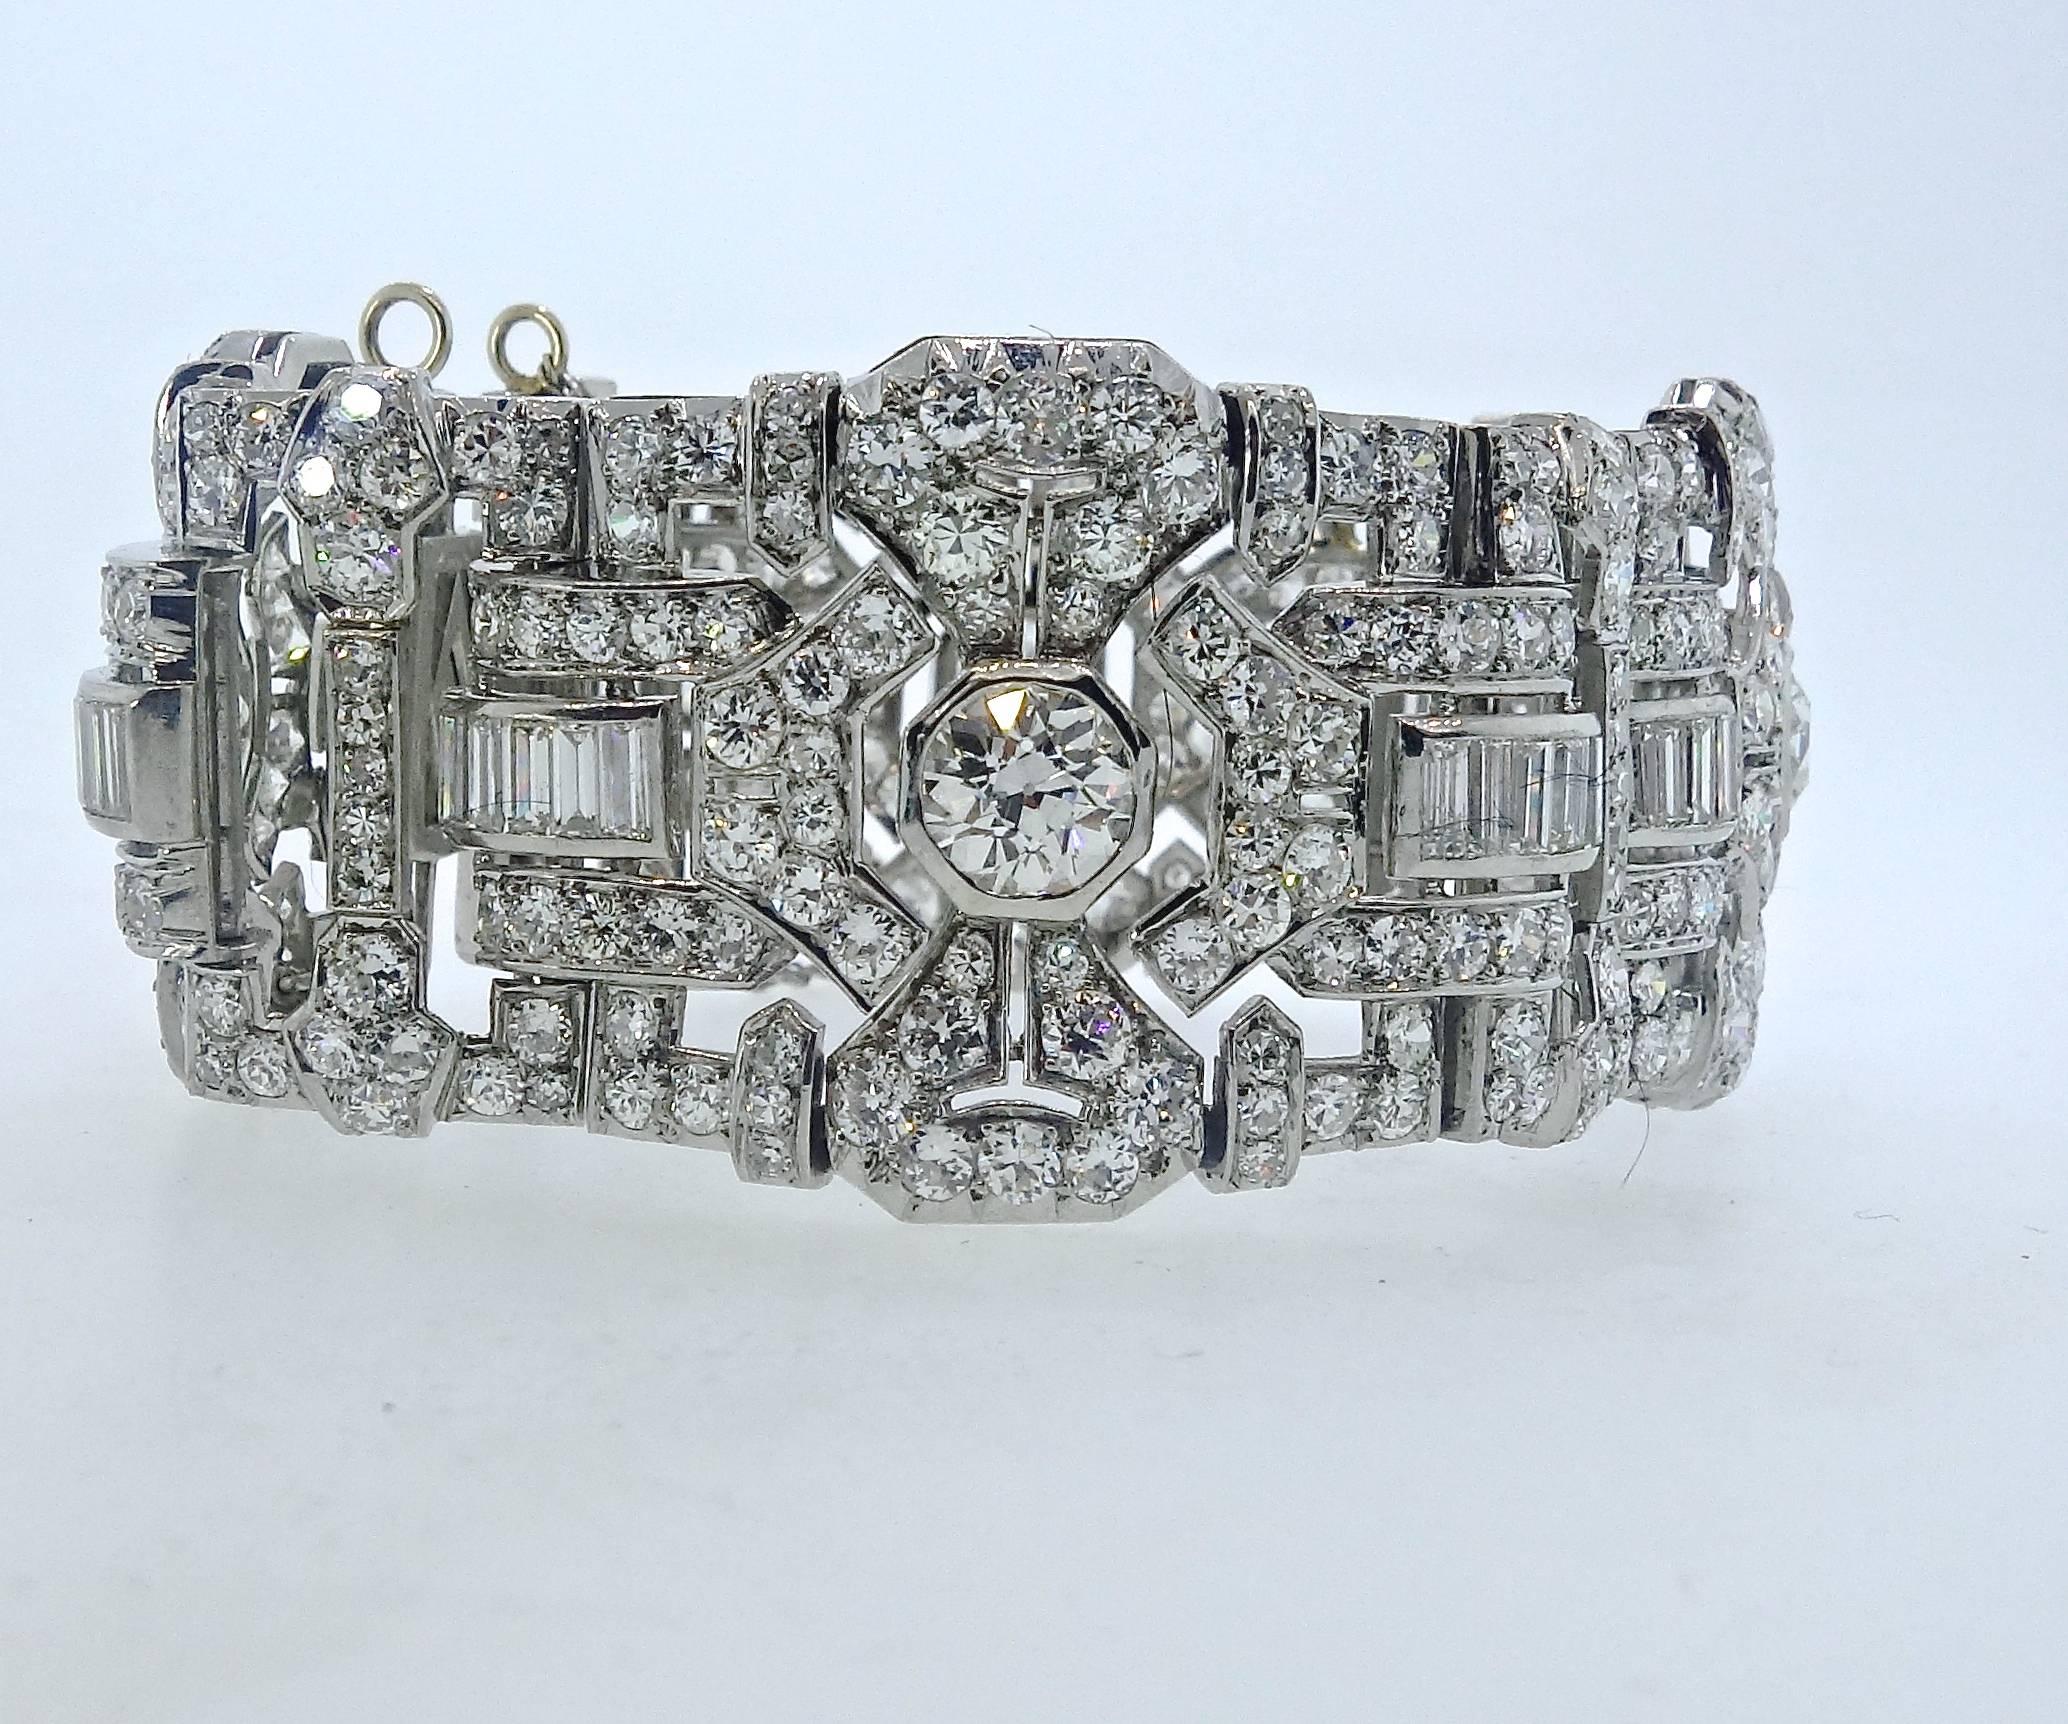 Classic French Art Deco statement with approximately 30 cts. (456 diamonds), of fine diamonds.  The four central major diamonds are a European cut, weighing approximately 1.20 cts., 1.30 cts., 1.40 cts., and 1.40 cts. (5.30 cts total.) These stones